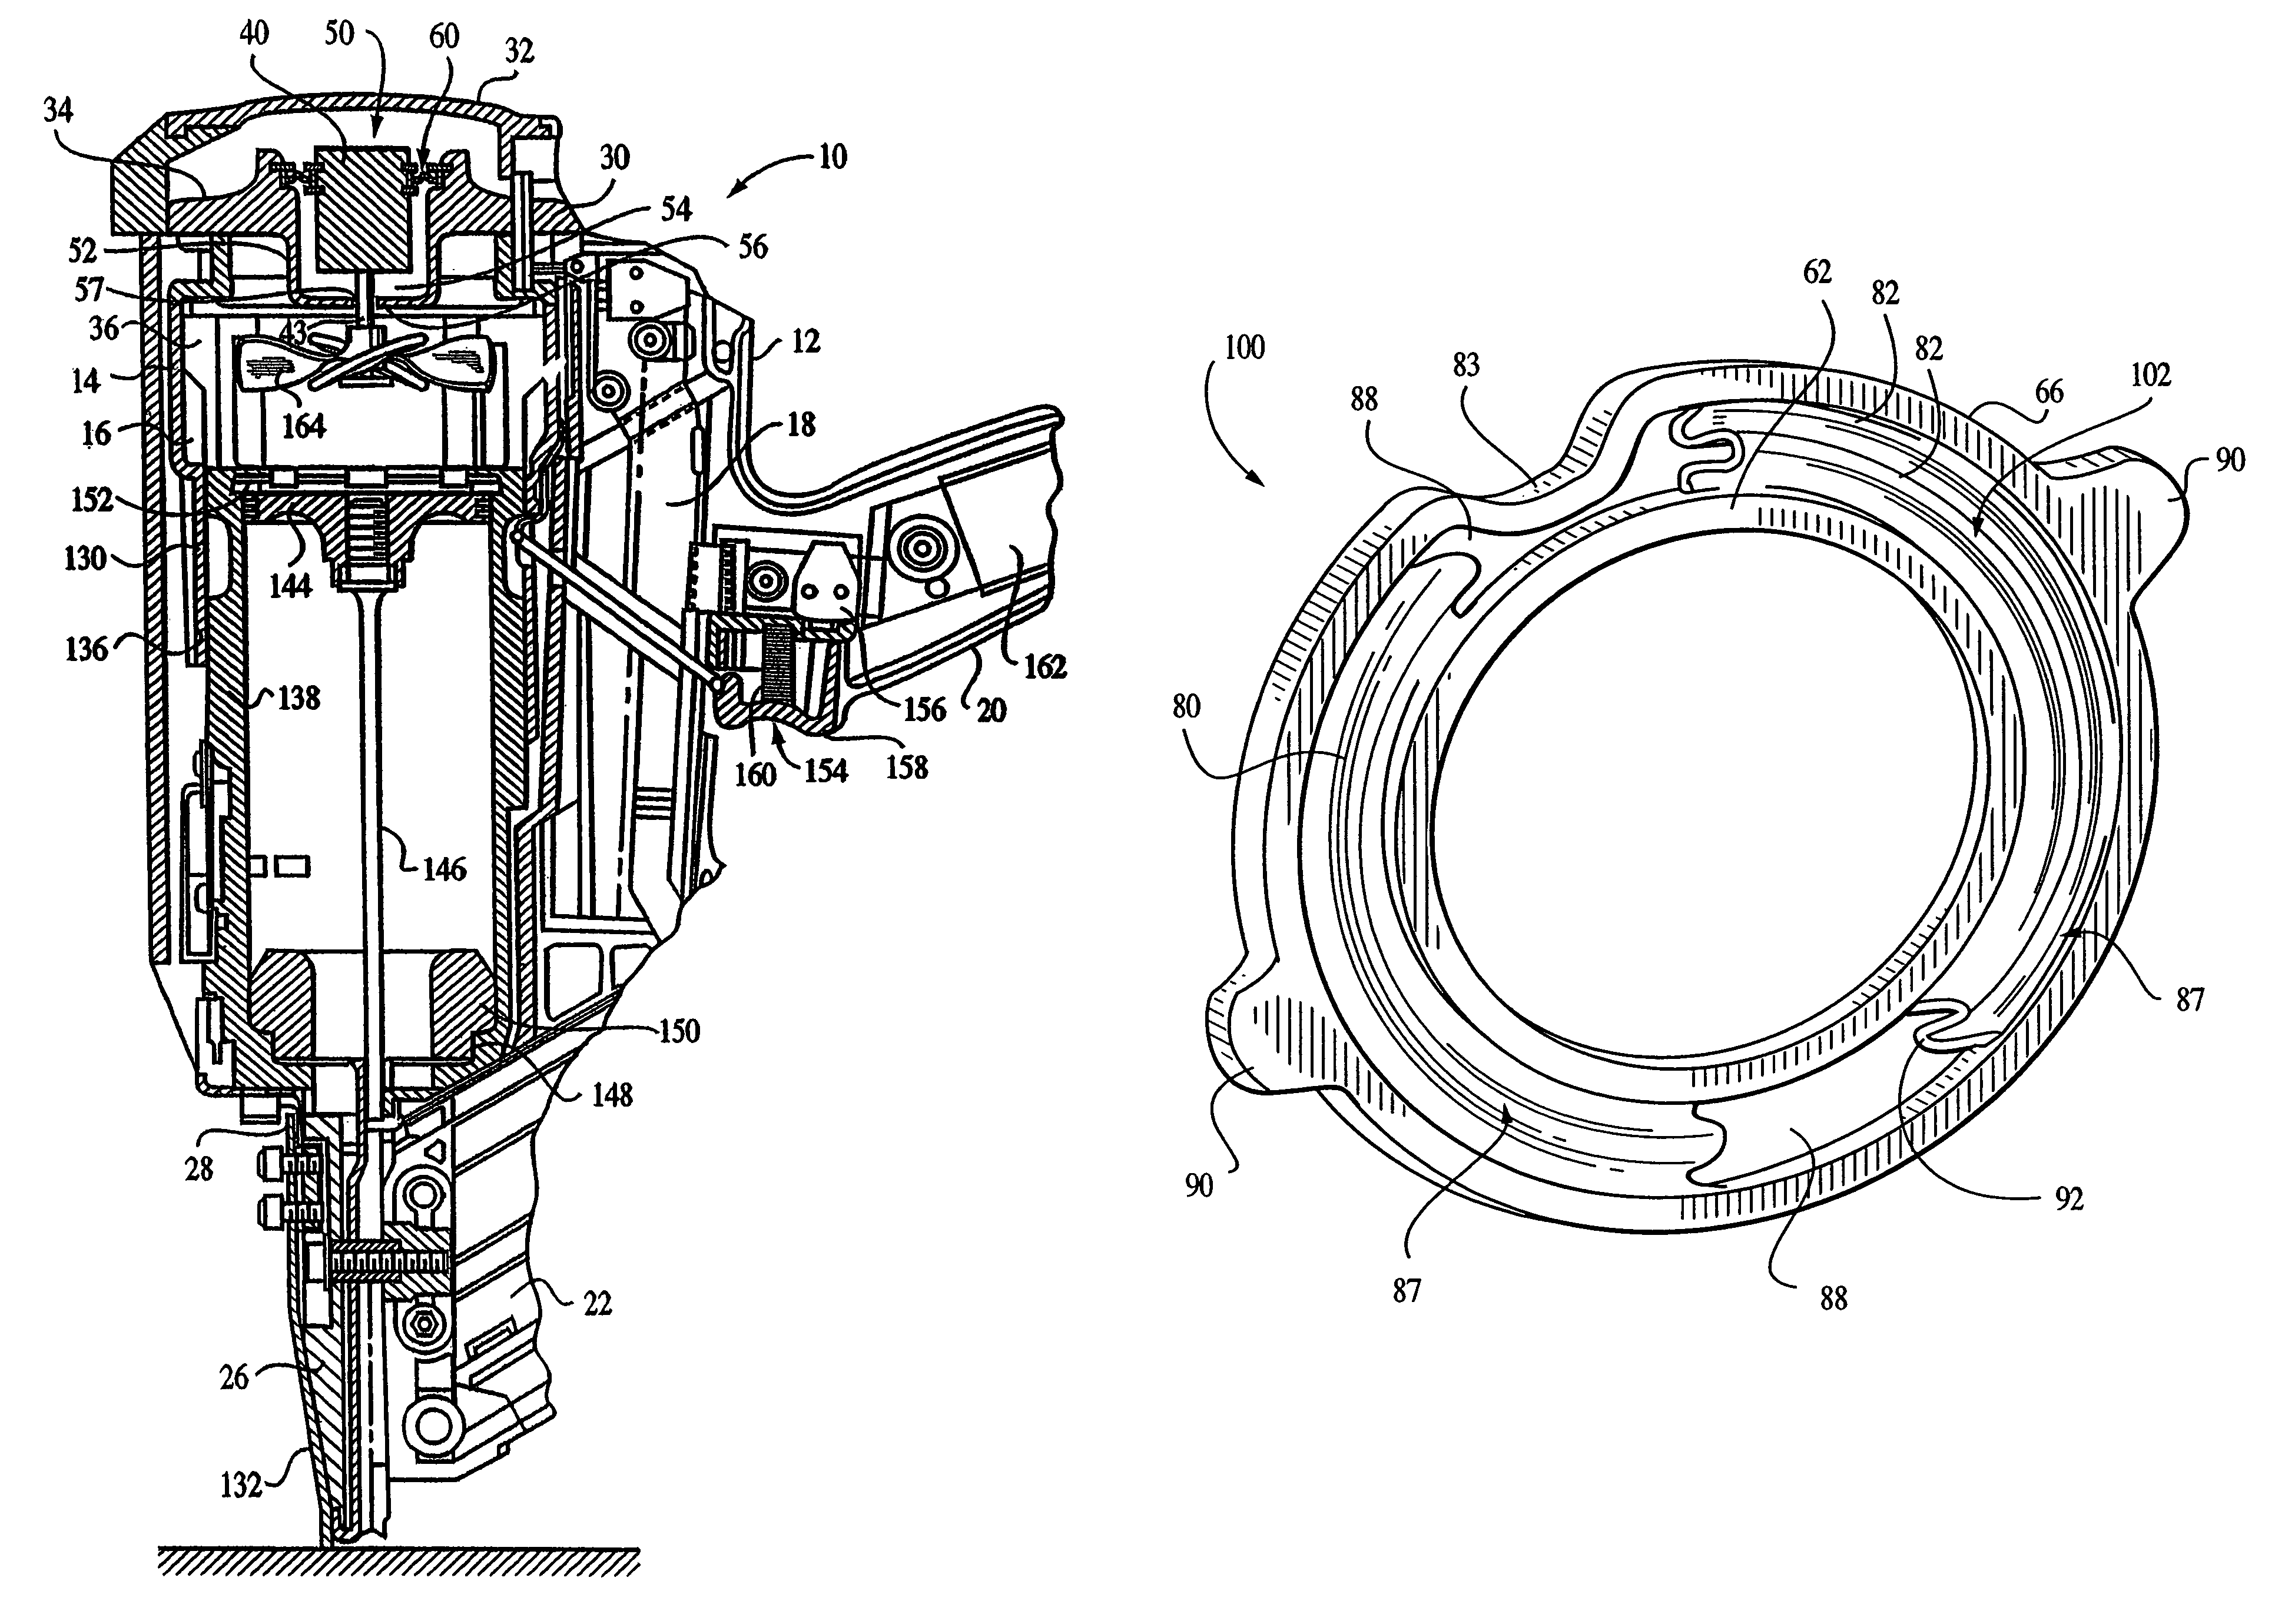 Fan motor suspension mount for a combustion-powered tool